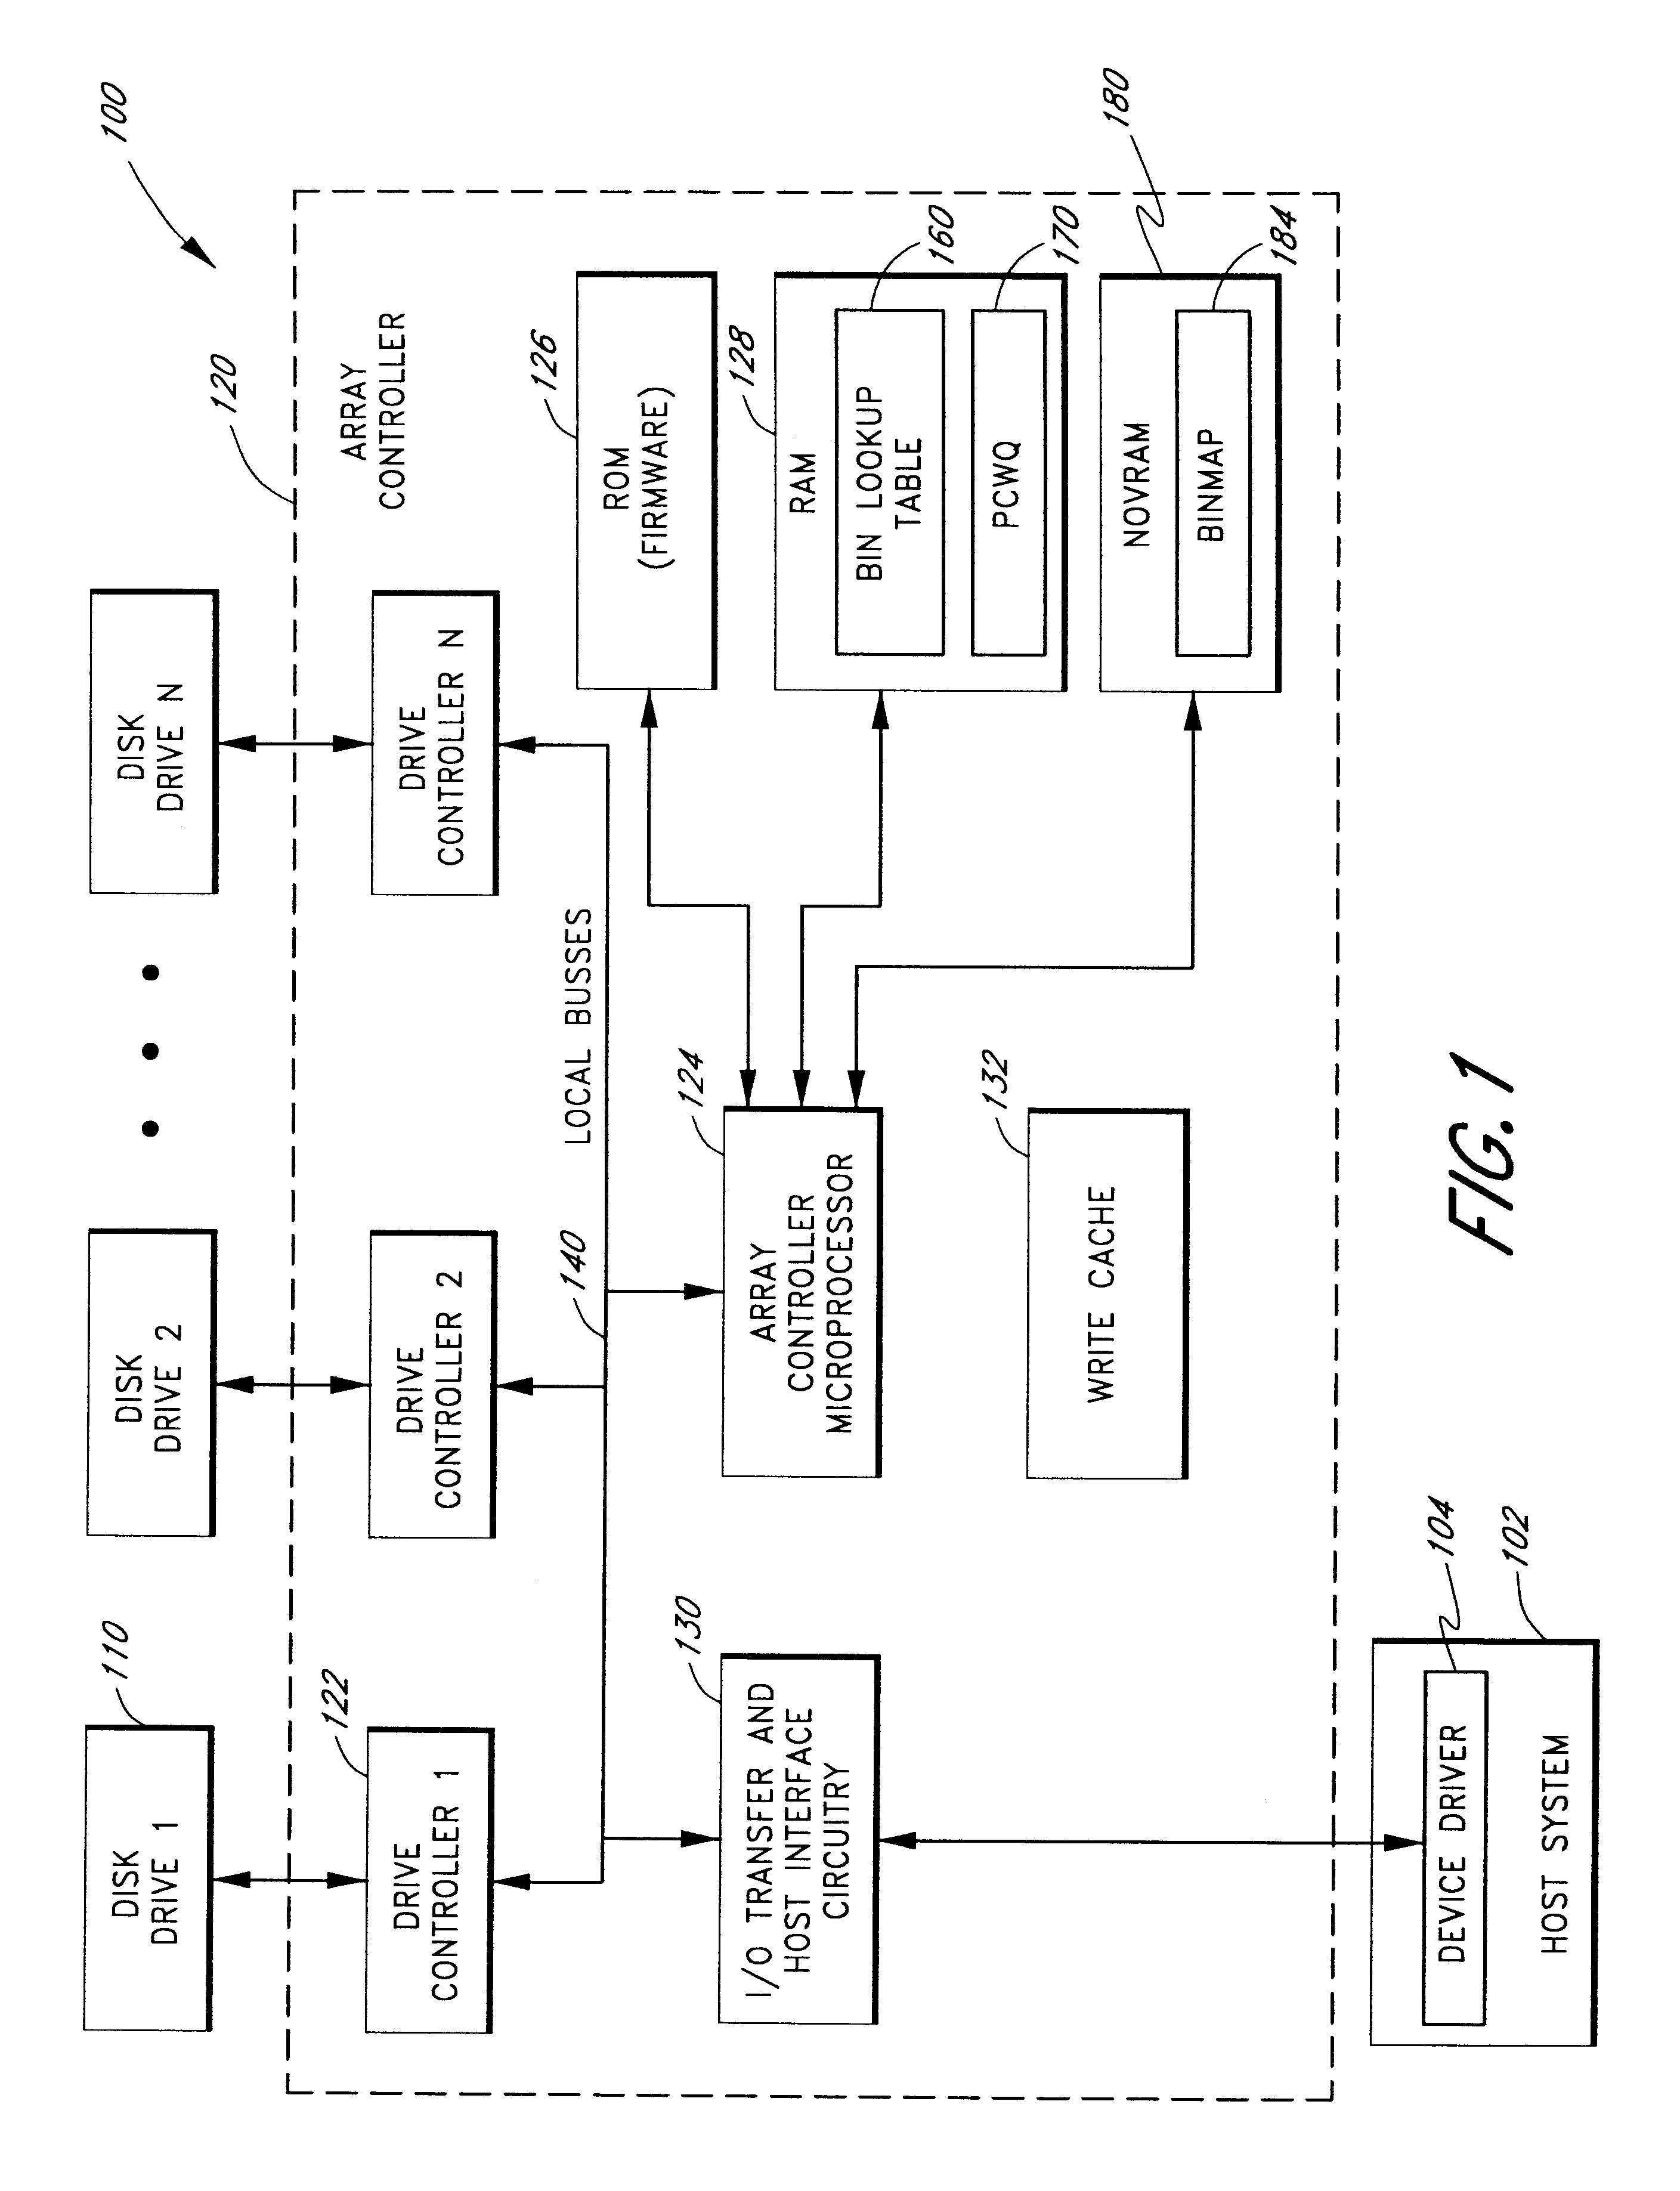 Use of activity bins to increase the performance of disk arrays